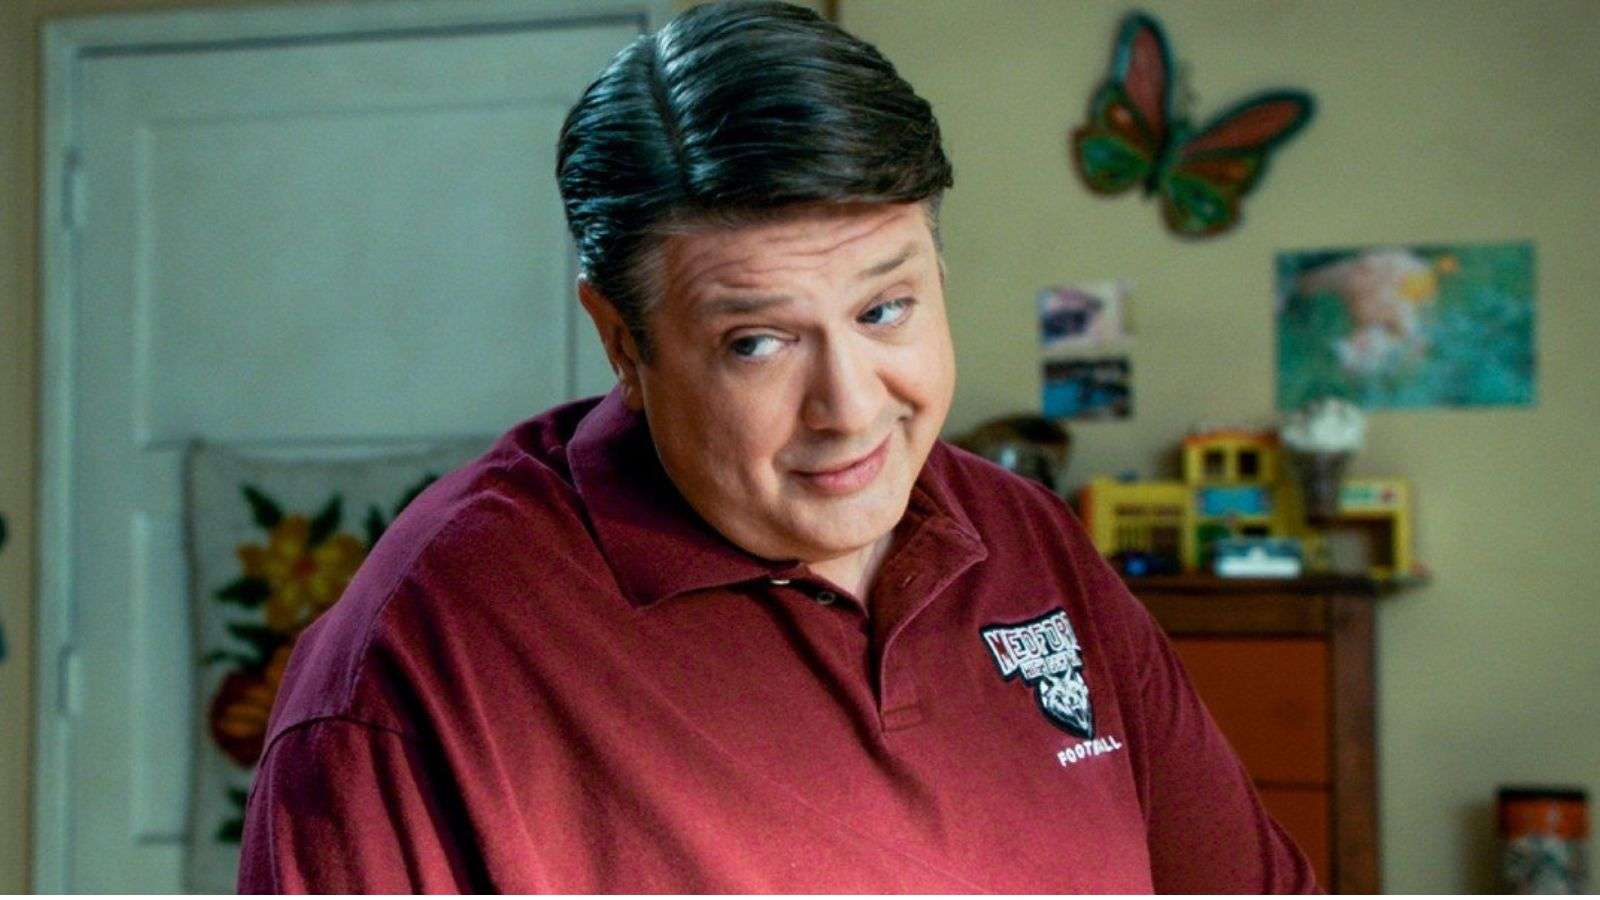 George Cooper in Young Sheldon